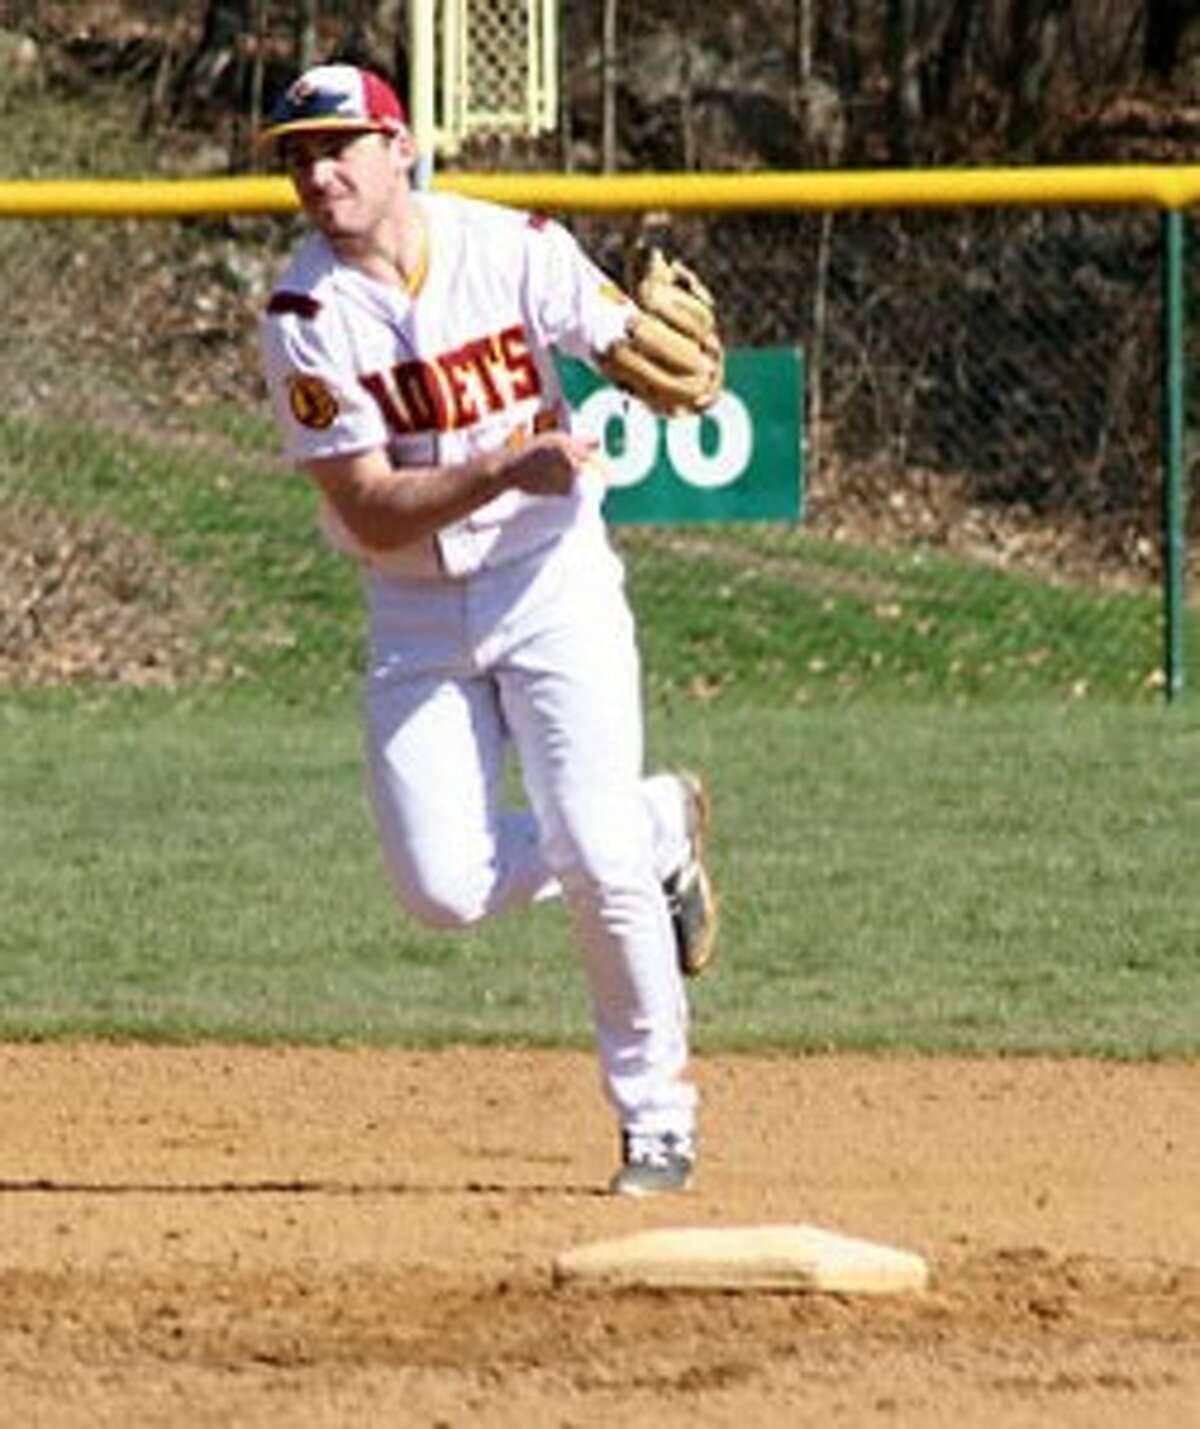 Neil Velasquez started two double plays for the Cadets.